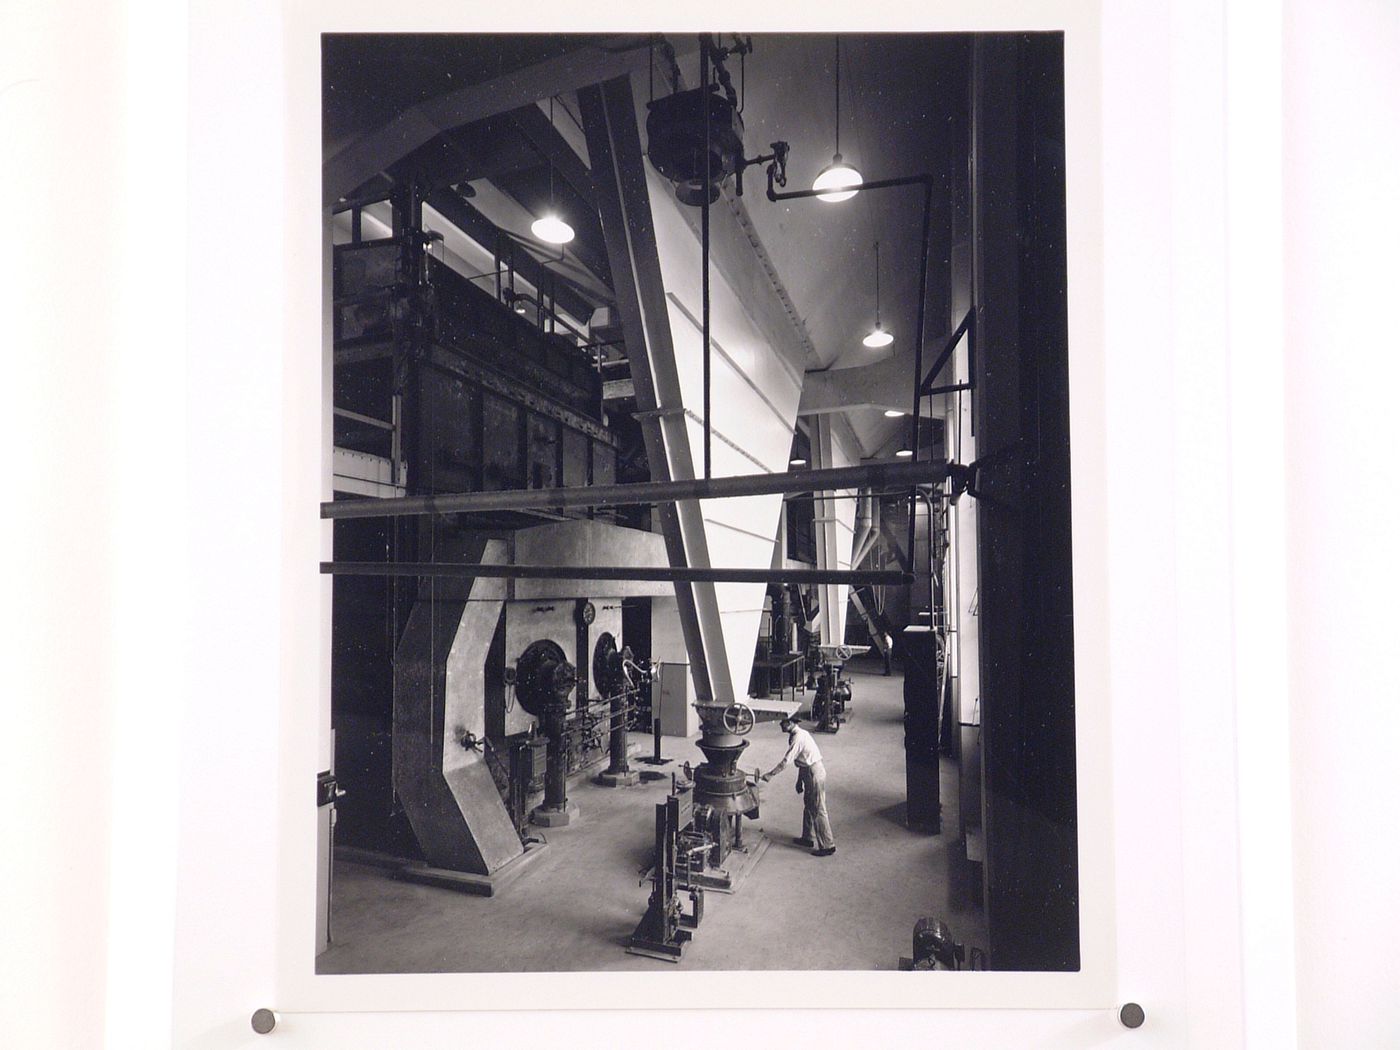 Interior view of the Boiler House, Curtiss-Wright Corporation Airplane division Assembly Plant, Louisville, Kentucky